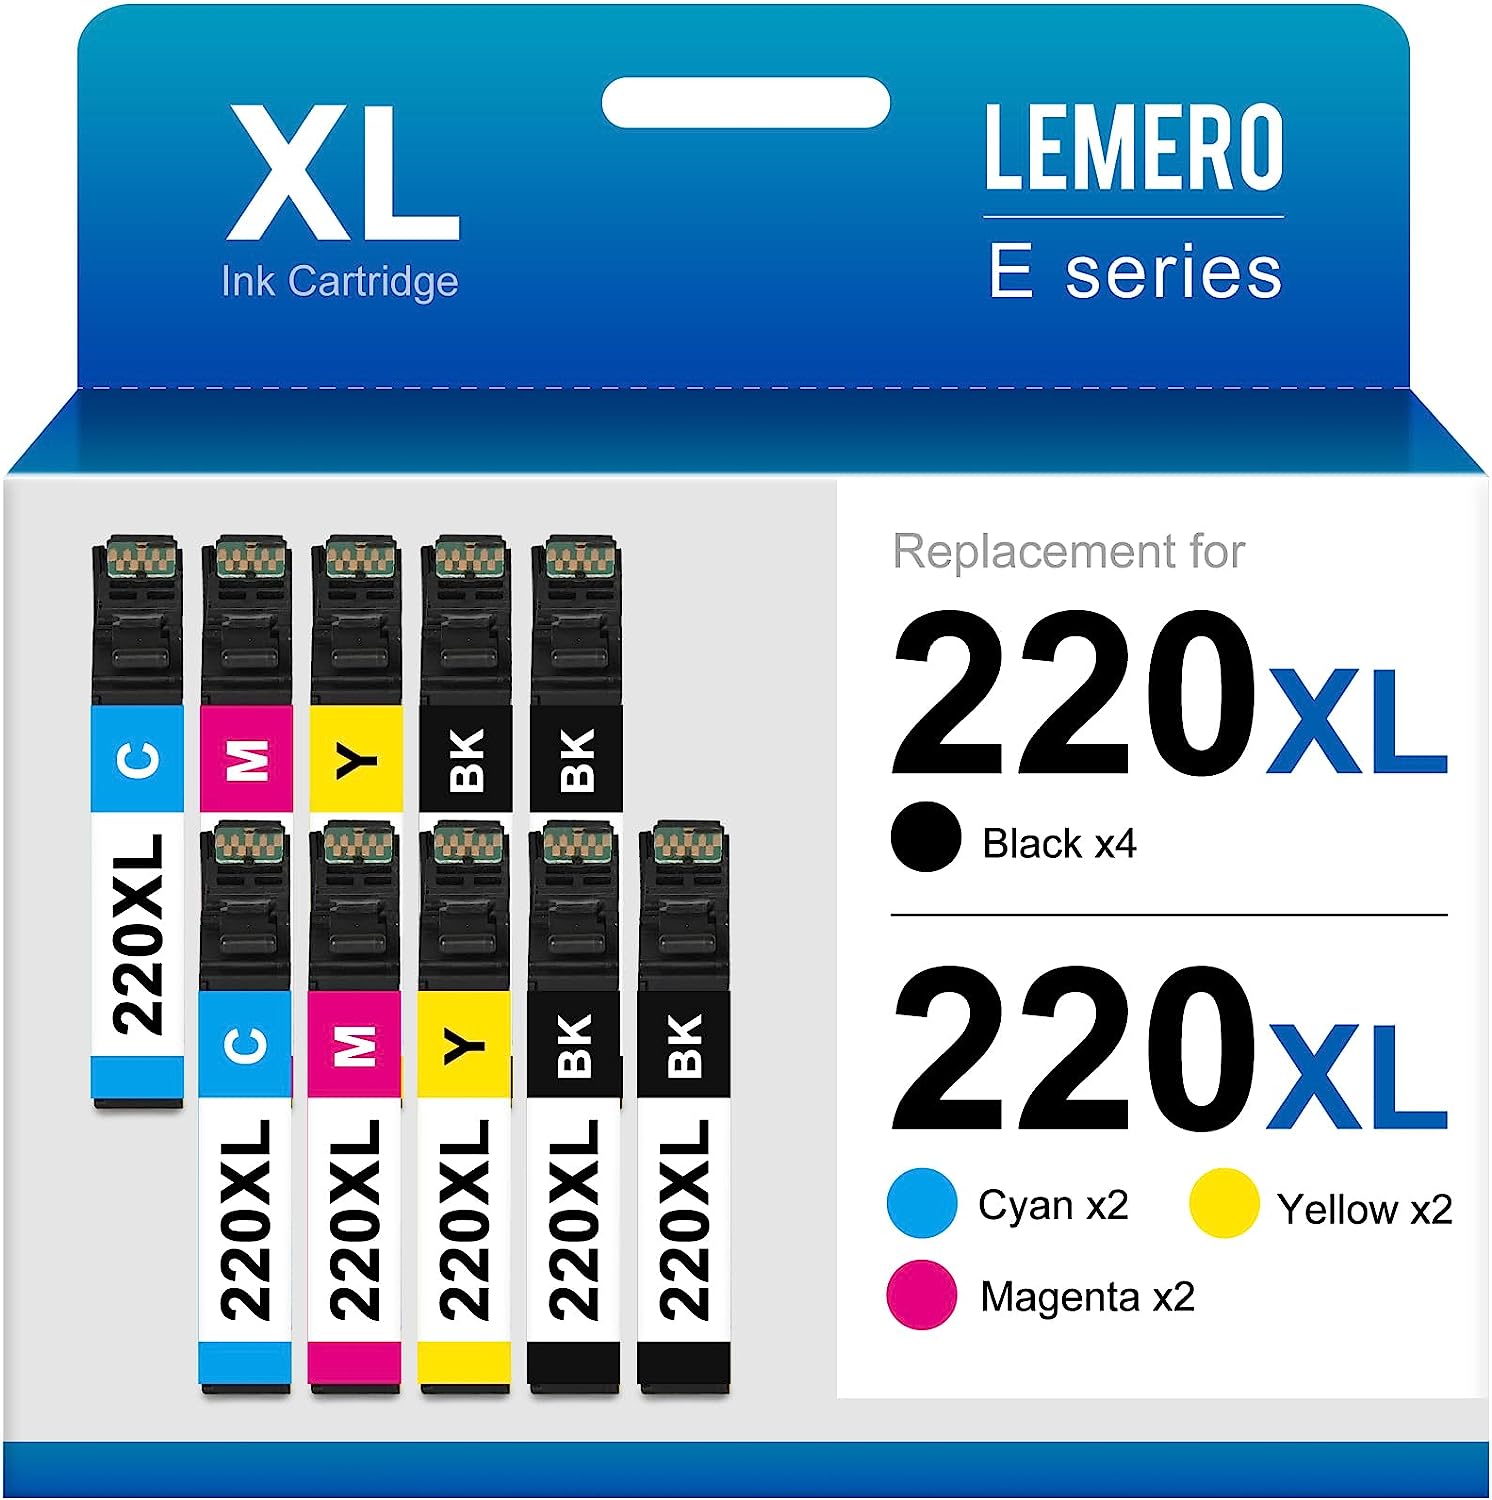 220XL Ink Cartridge Multipack: Packaging image of LEMERO 220XL high-capacity ink cartridges showing individual cartridges for black, cyan, magenta, and yellow, highlighting their high page yield and suitability for frequent printing.